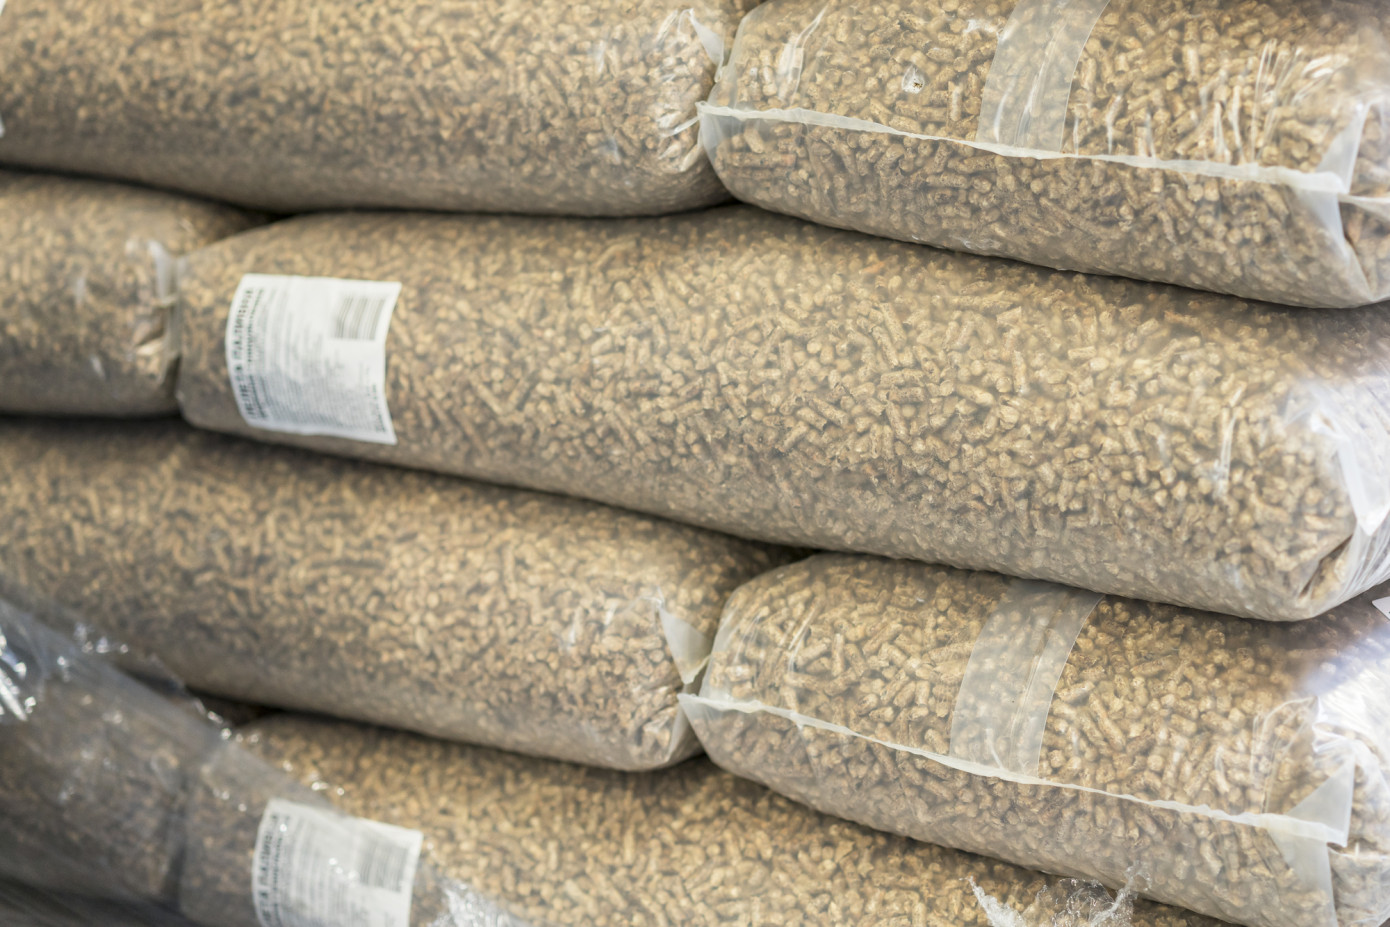 Exports of wood pellets from Canada contract 42% in February